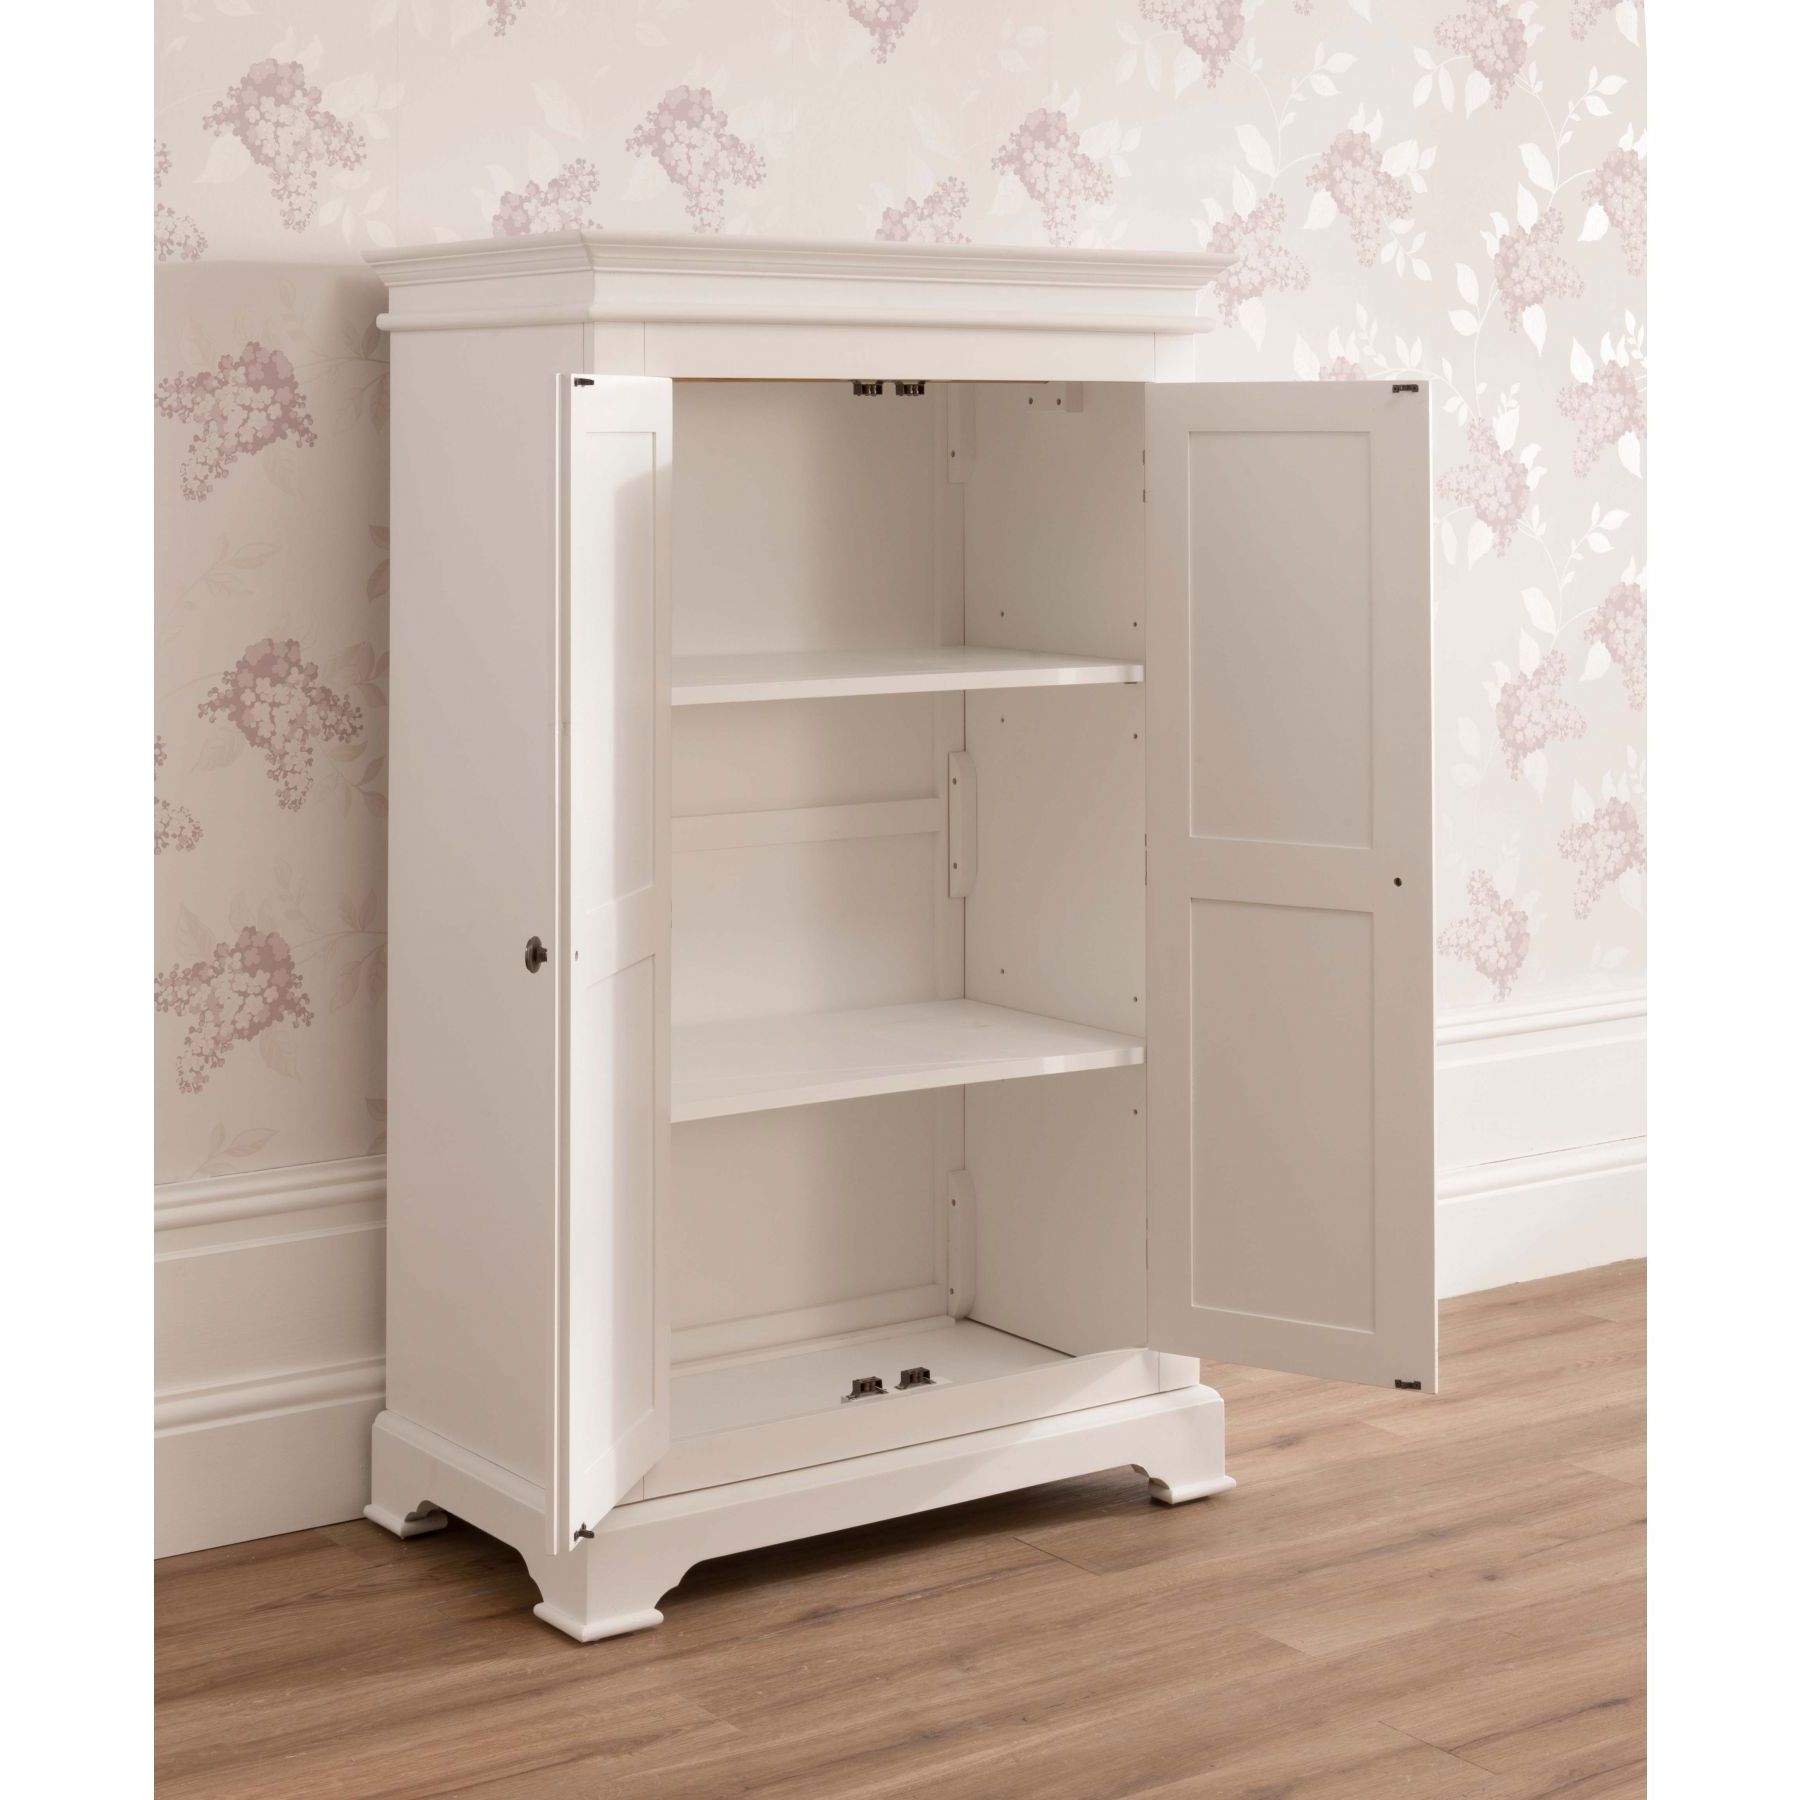 Sophia Wardrobes With Most Current Sophia Kids Shabby Chic Wardrobe Works Wonderful Alongside Our (View 1 of 15)